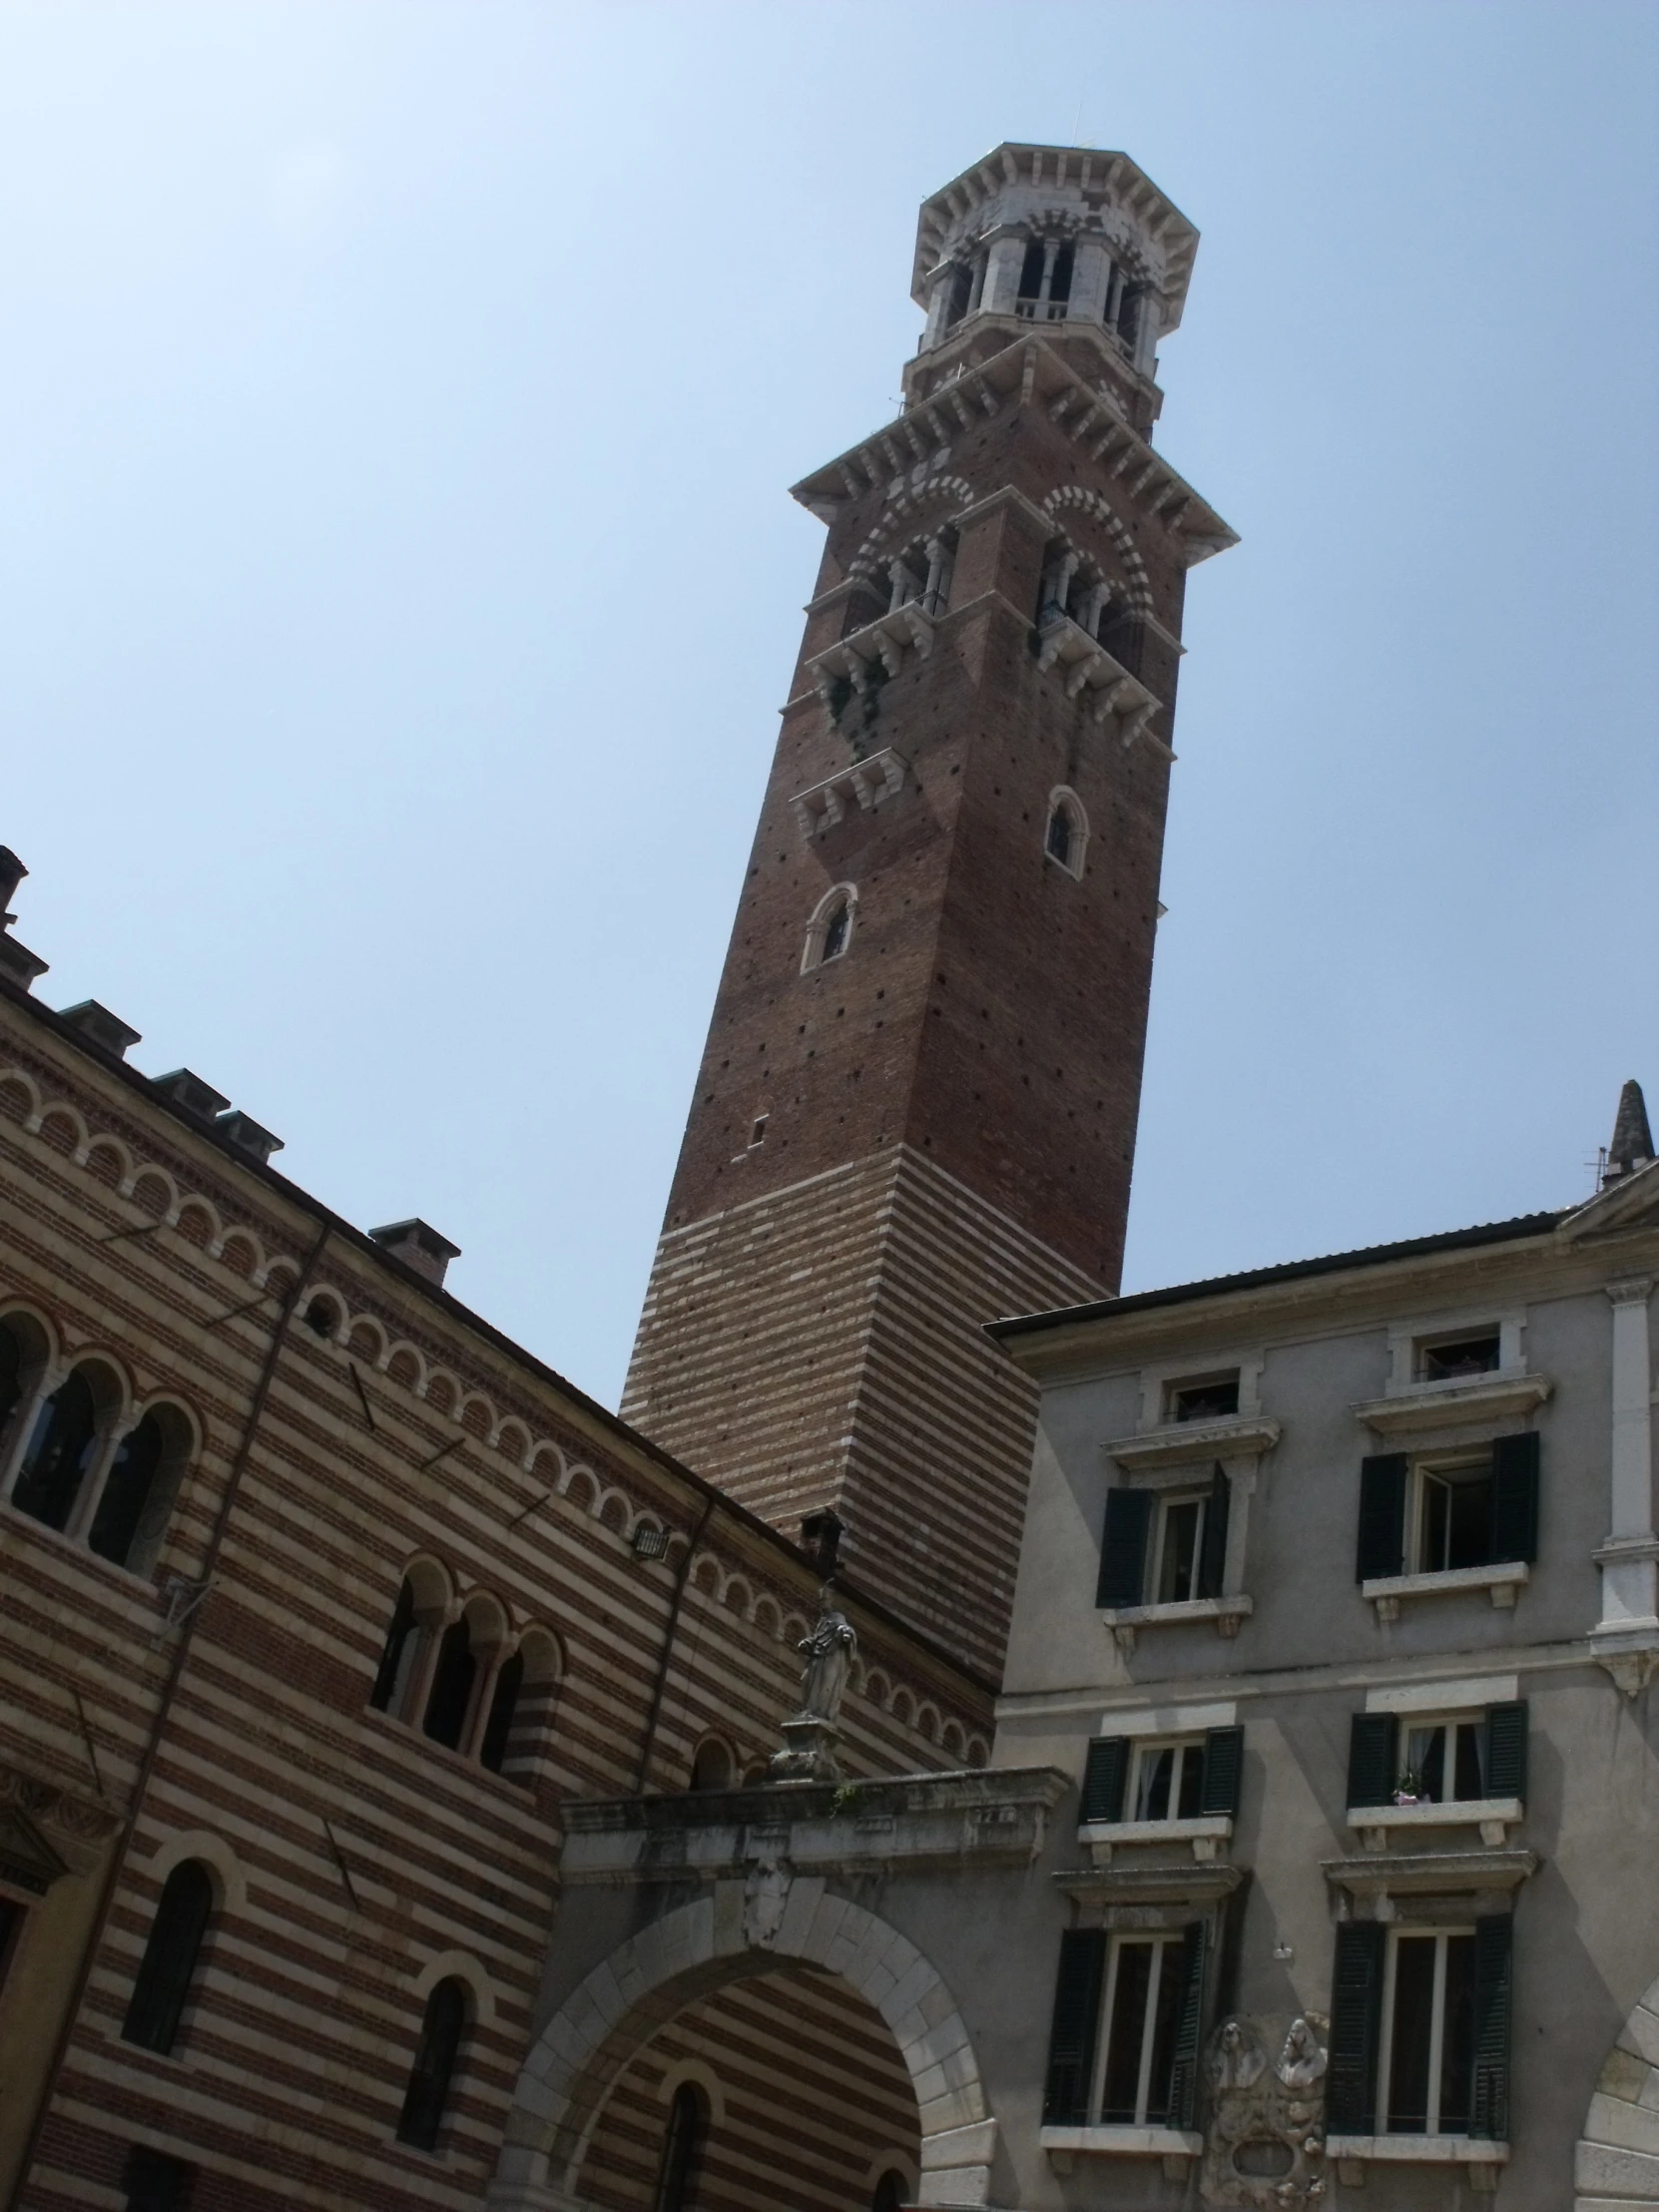 a tall brown brick clock tower next to an old stone building